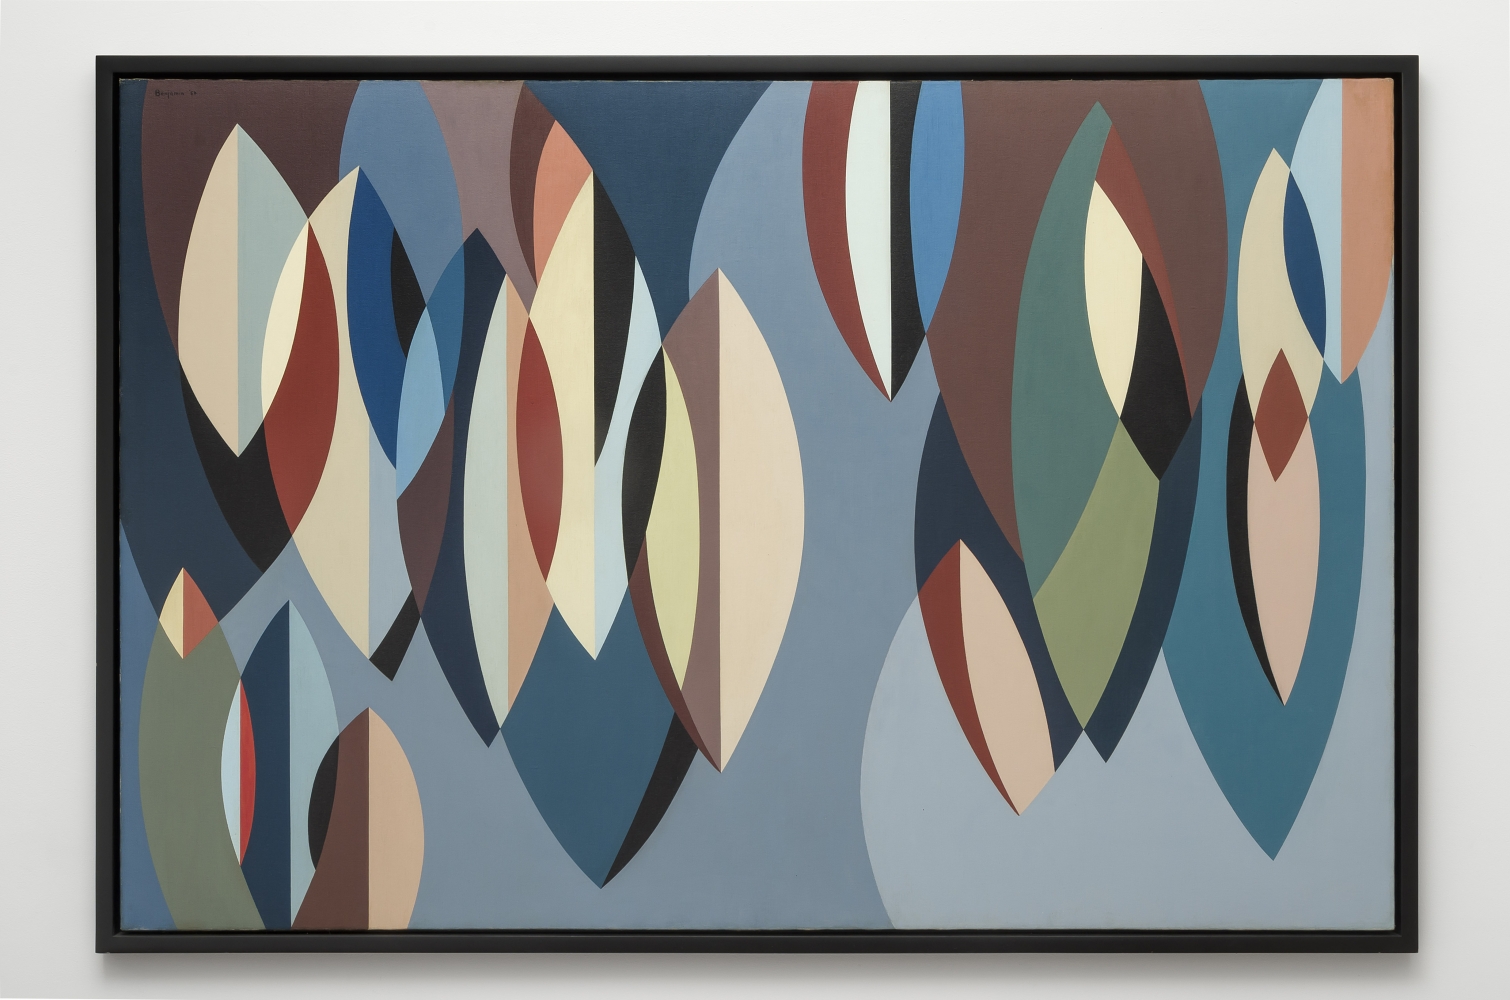 Karl Benjamin (1925-2012) Elliptical Planes, 1956 oil on canvas 48 x 72 inches; 121.9 x 182.9 centimeters LSFA# 10787